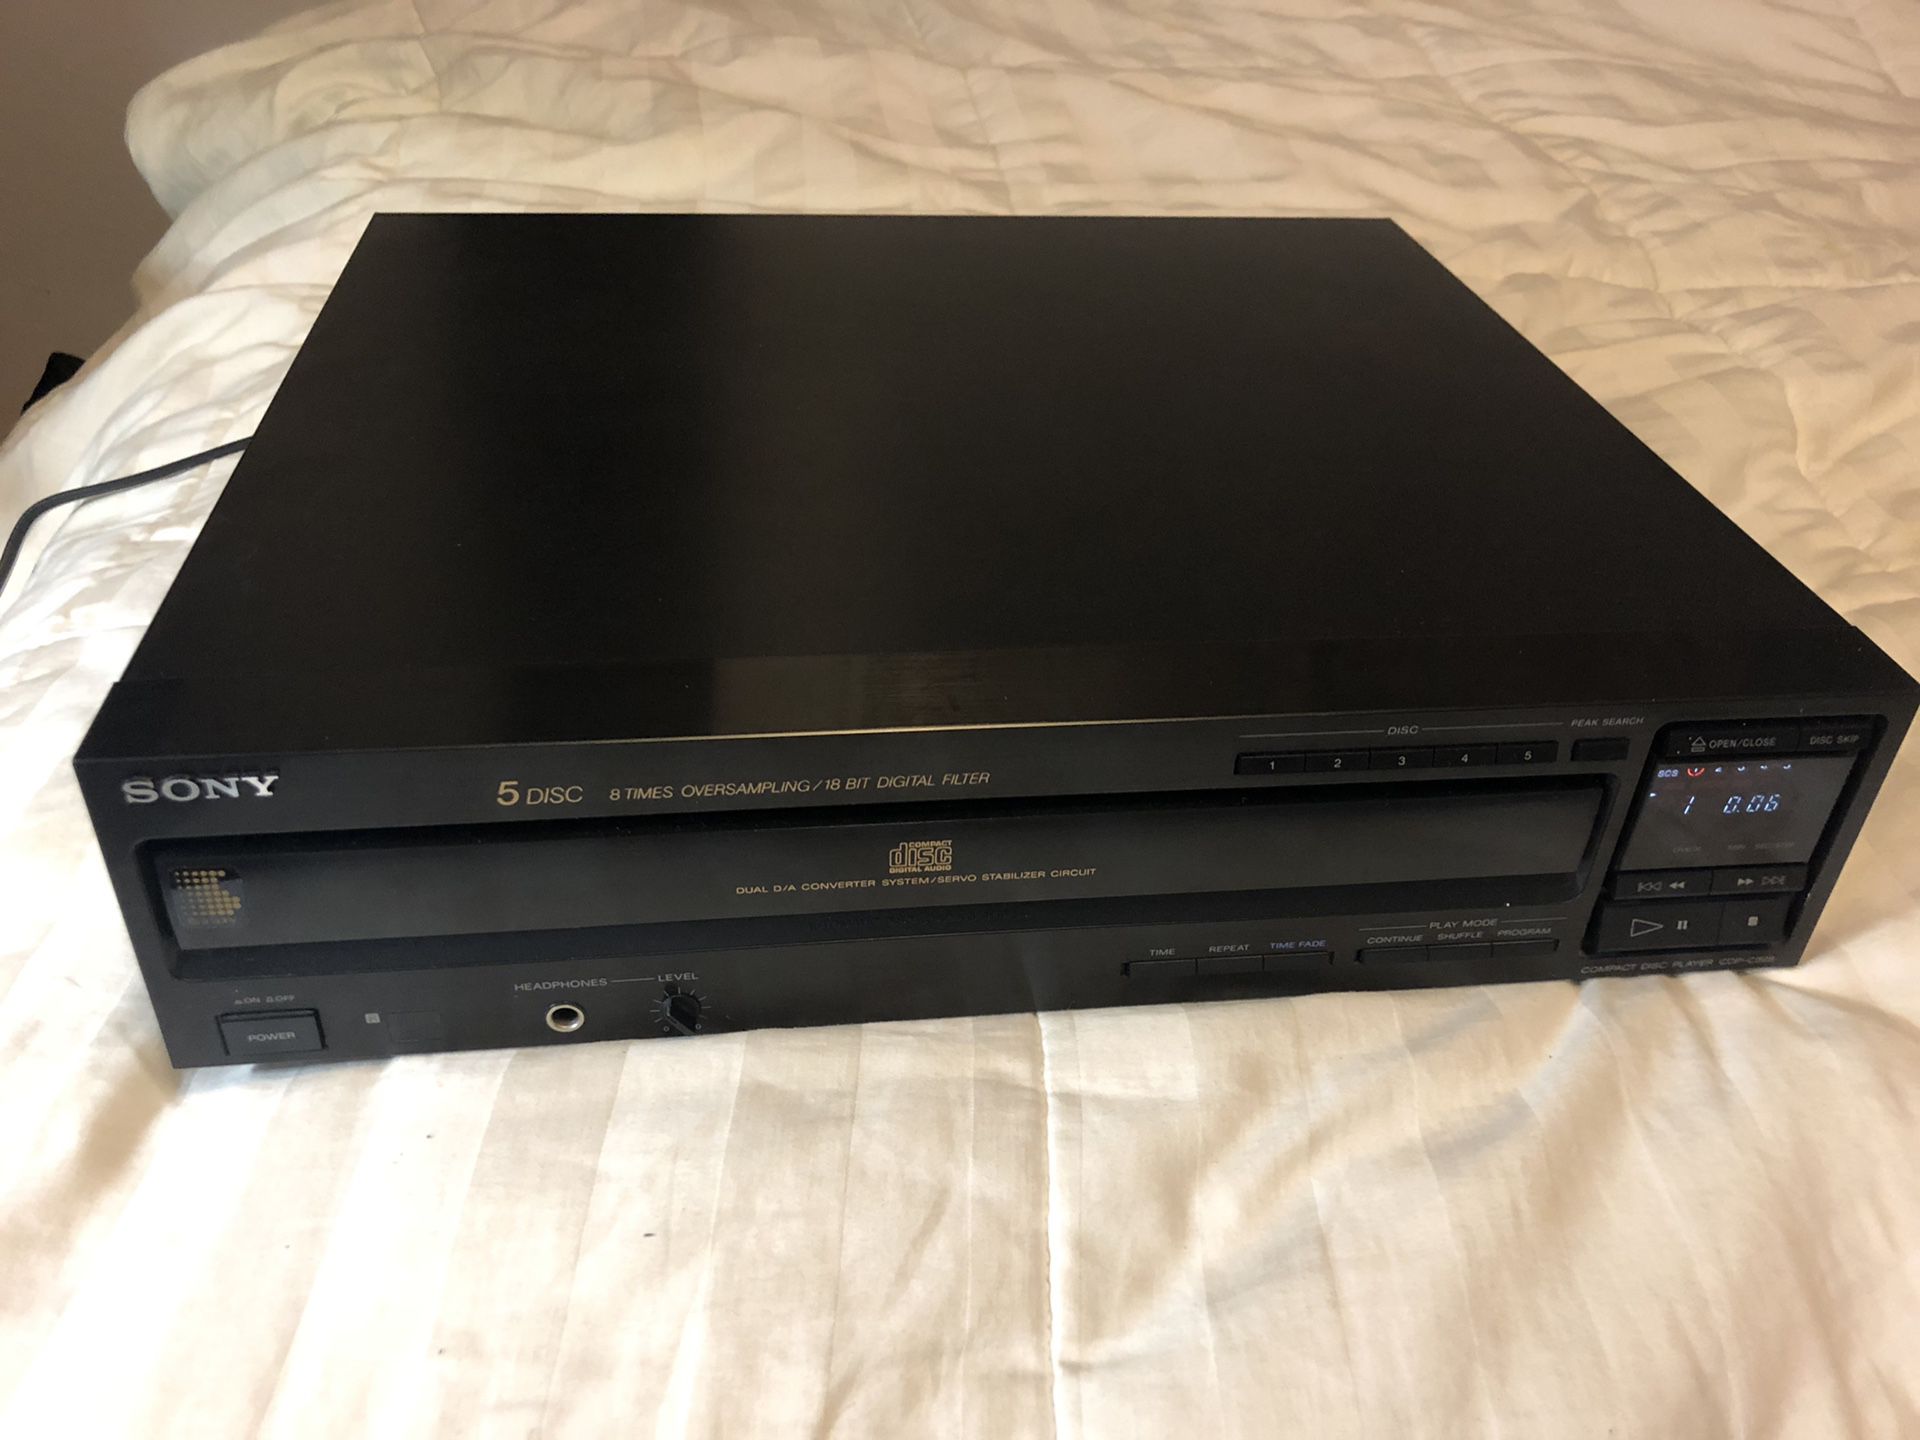 Sony CDP-C505 CD Player - Disc CD Changer - 18 Bit Filter - Tested & Working